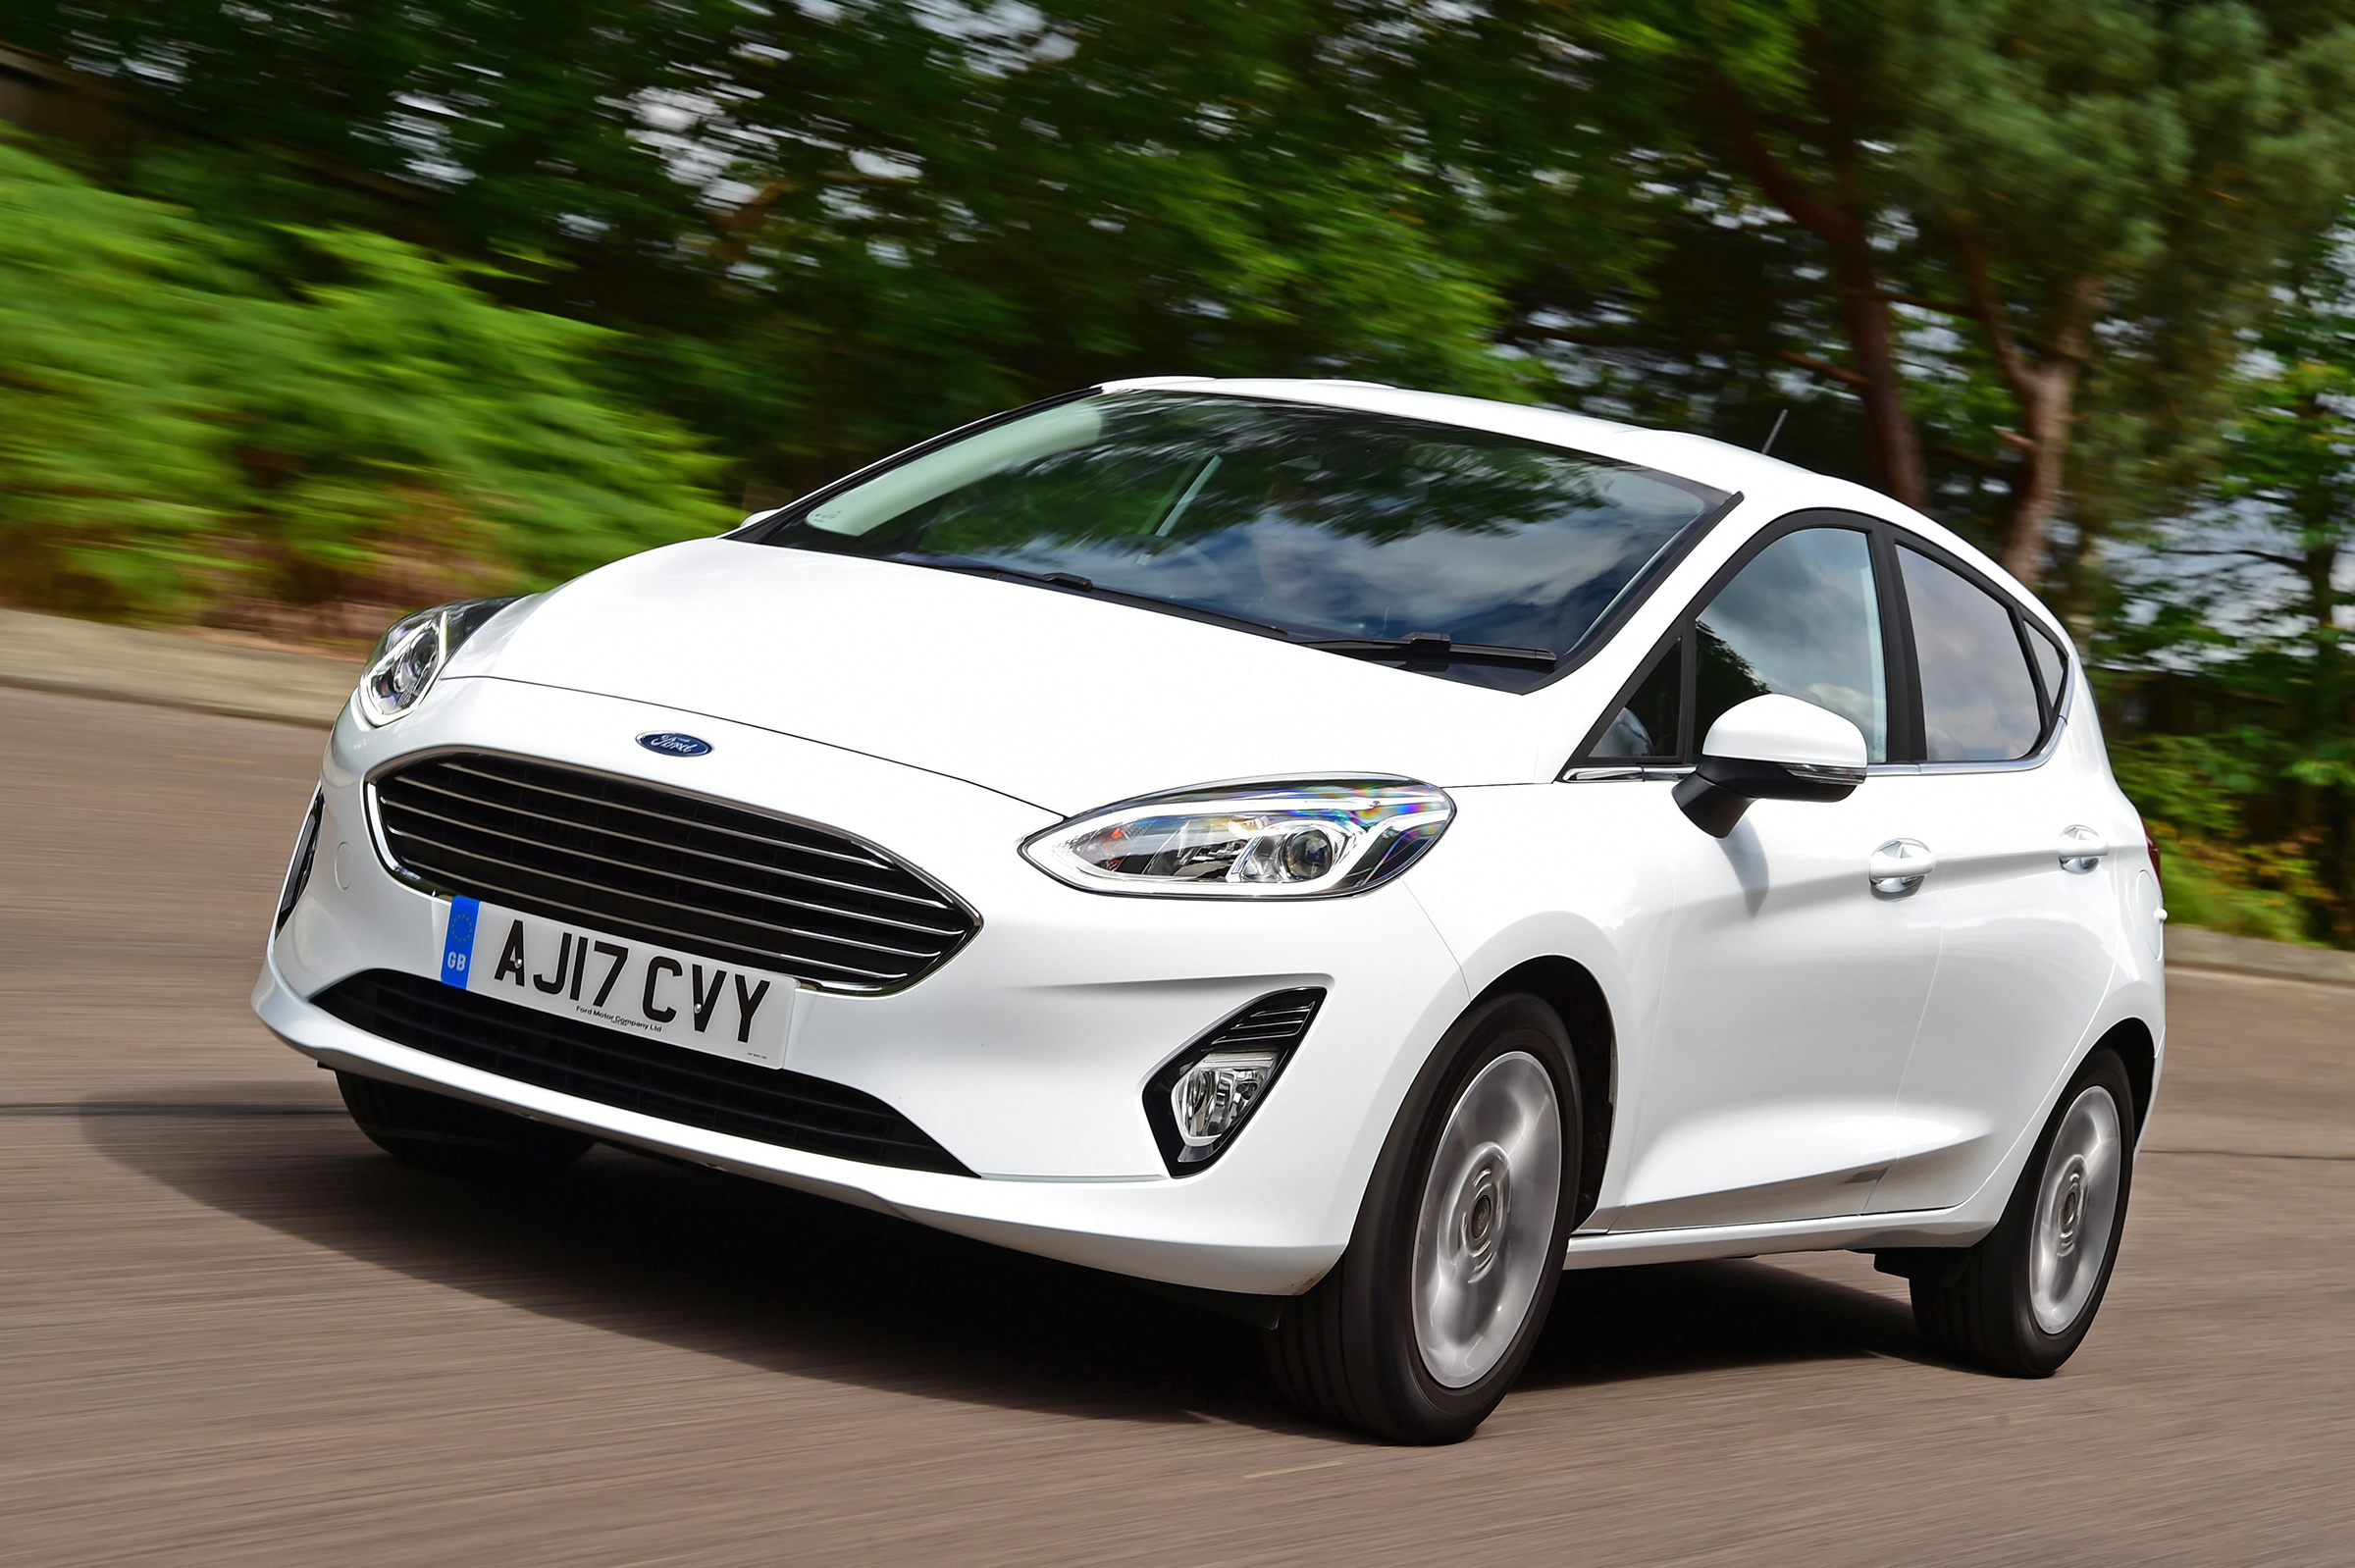 Ford Fiesta Zetec 1.0 EcoBoost review Carbuyer